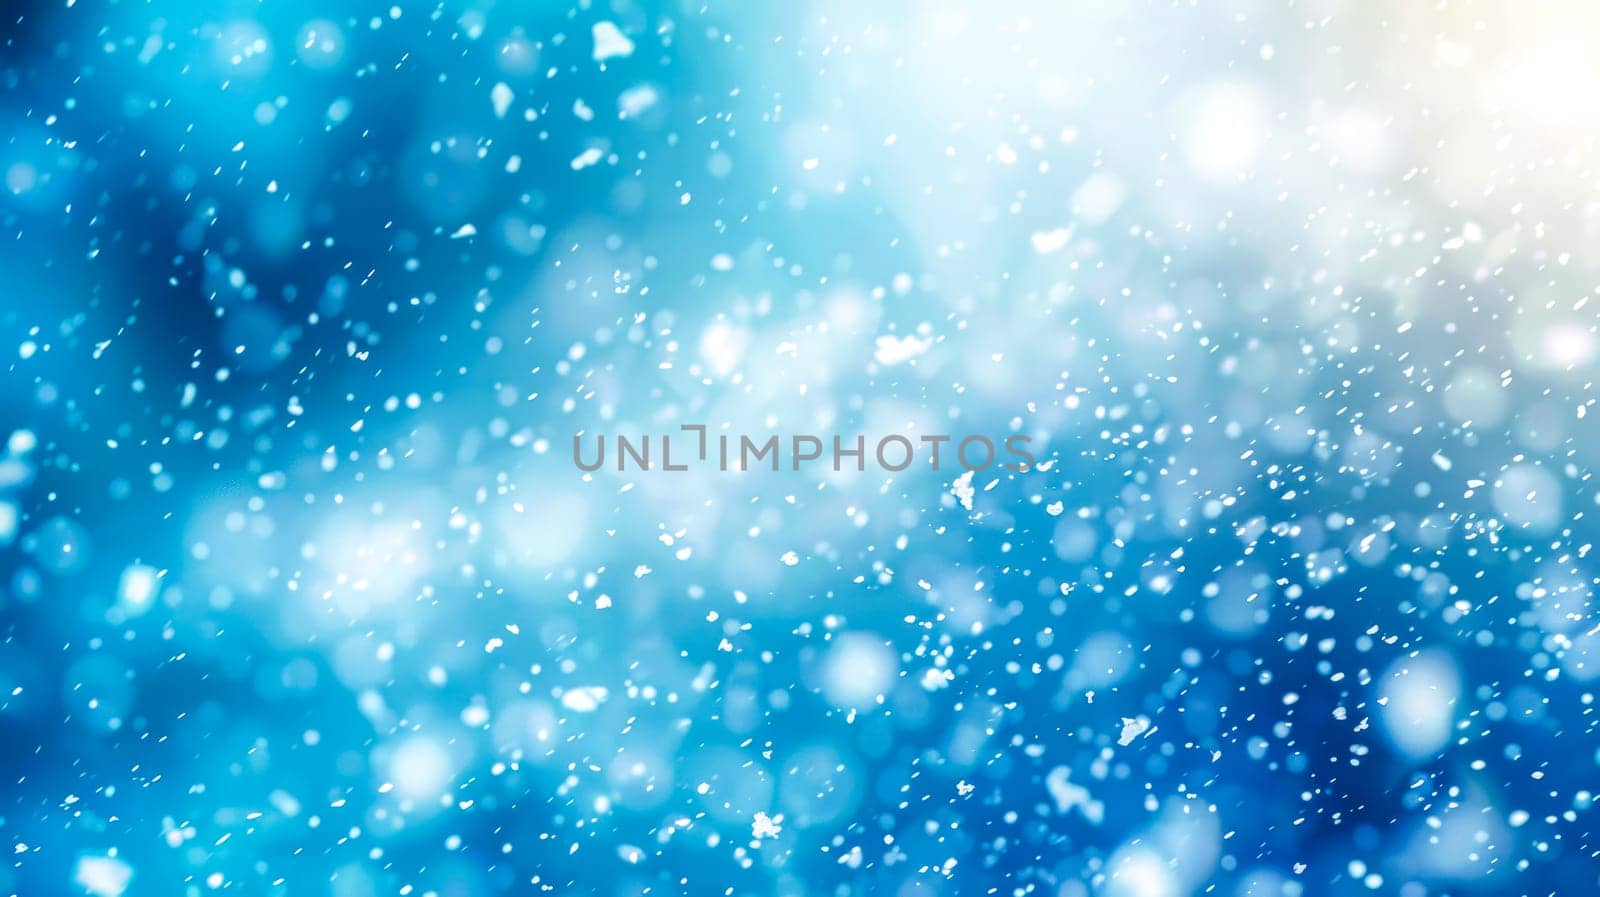 Winter wonderland background with snowflakes, bokeh lights, and abstract blue soft focus, creating a tranquil and magical effect for the festive holiday season